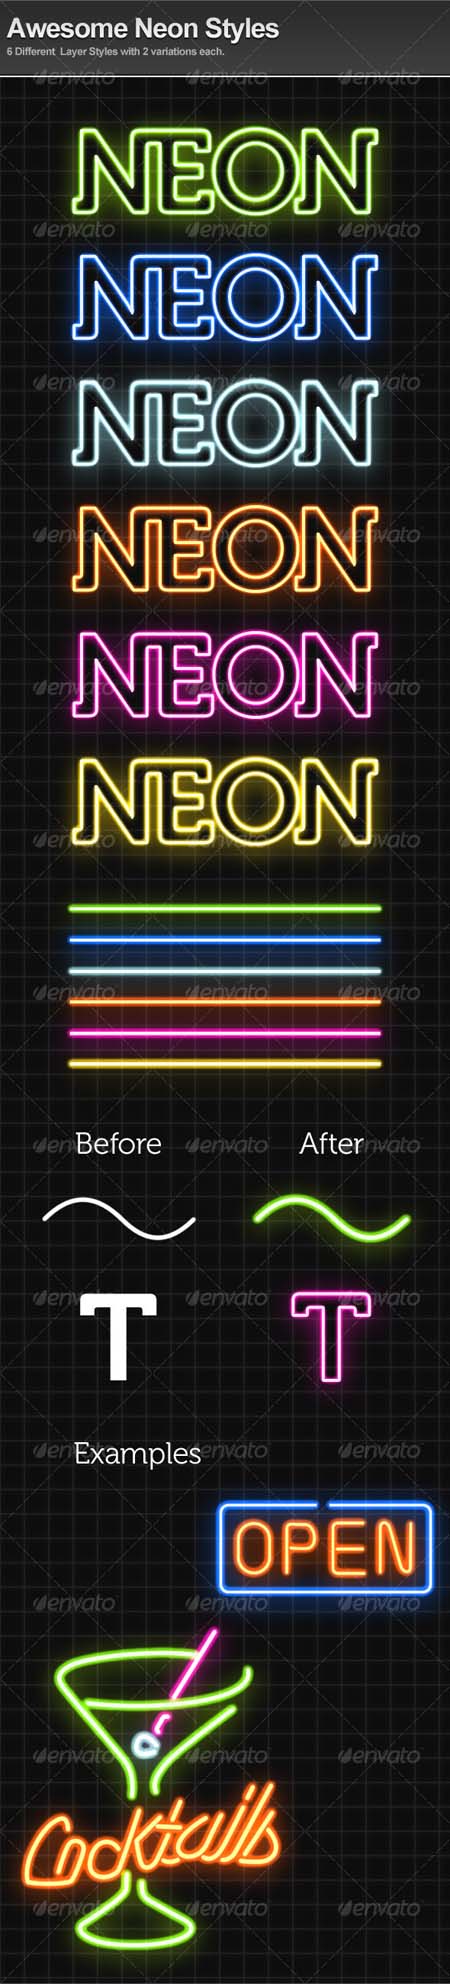 GraphicRiver Awesome Neon Styles